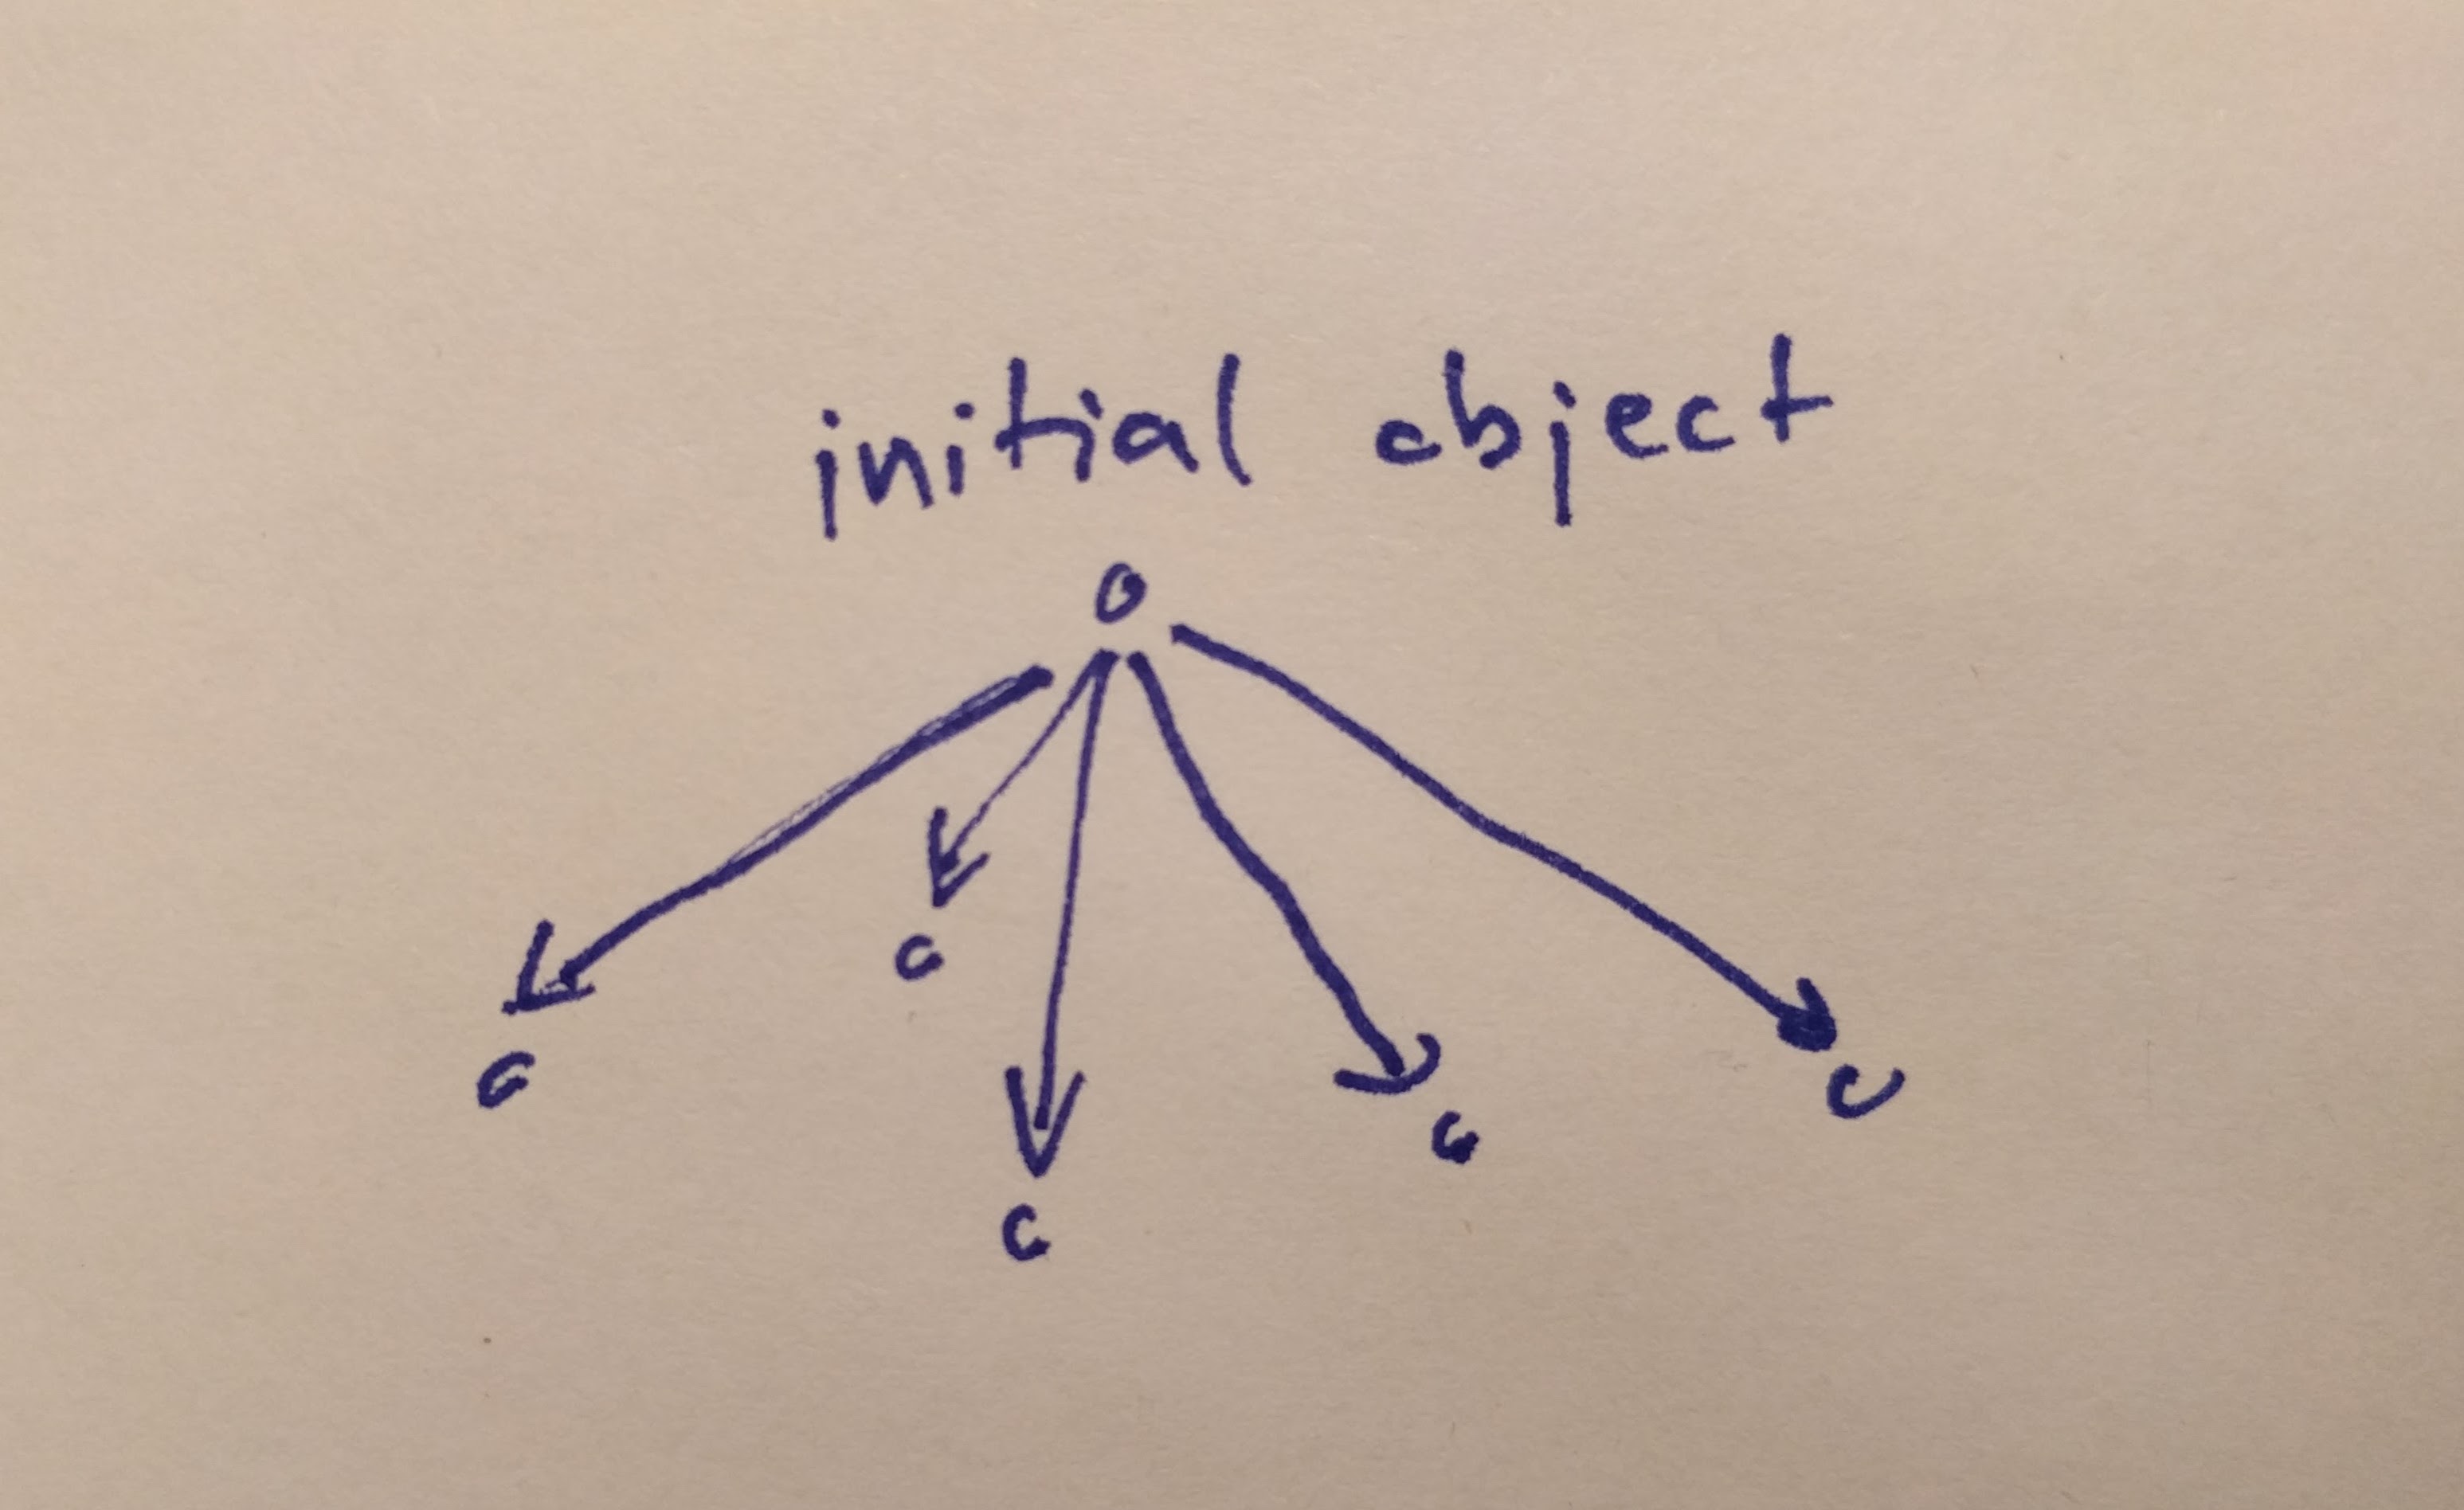 initial object